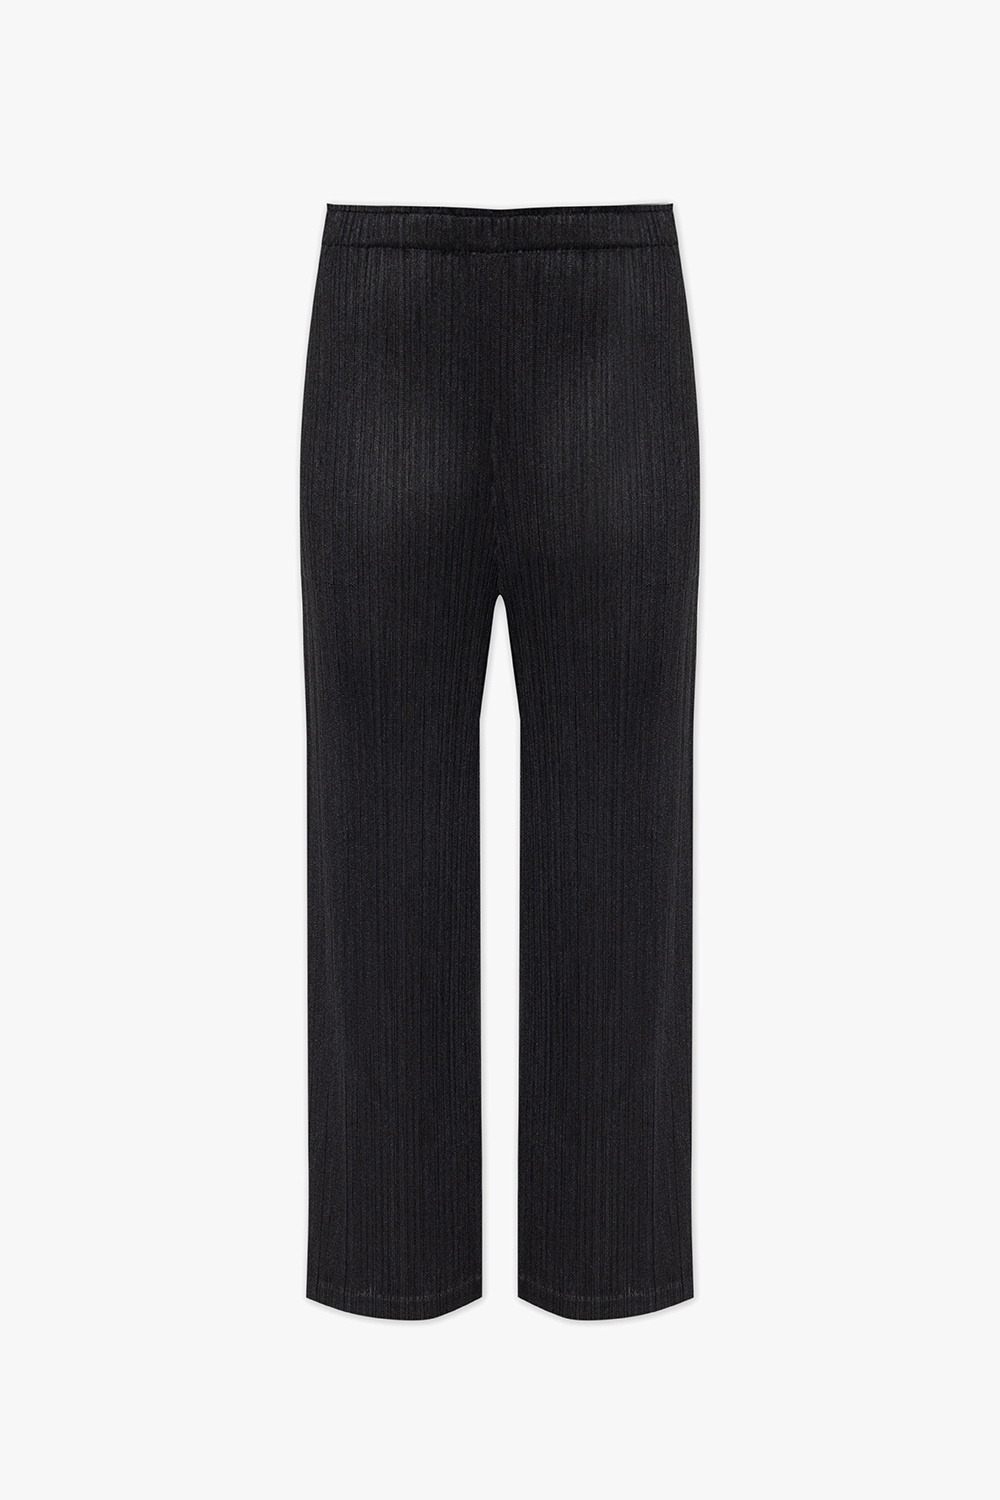 GenesinlifeShops Canada - Black Pleated trousers Issey Miyake Pleats Please  - Shorts Sportswear Sport Classic Essentials French Terry